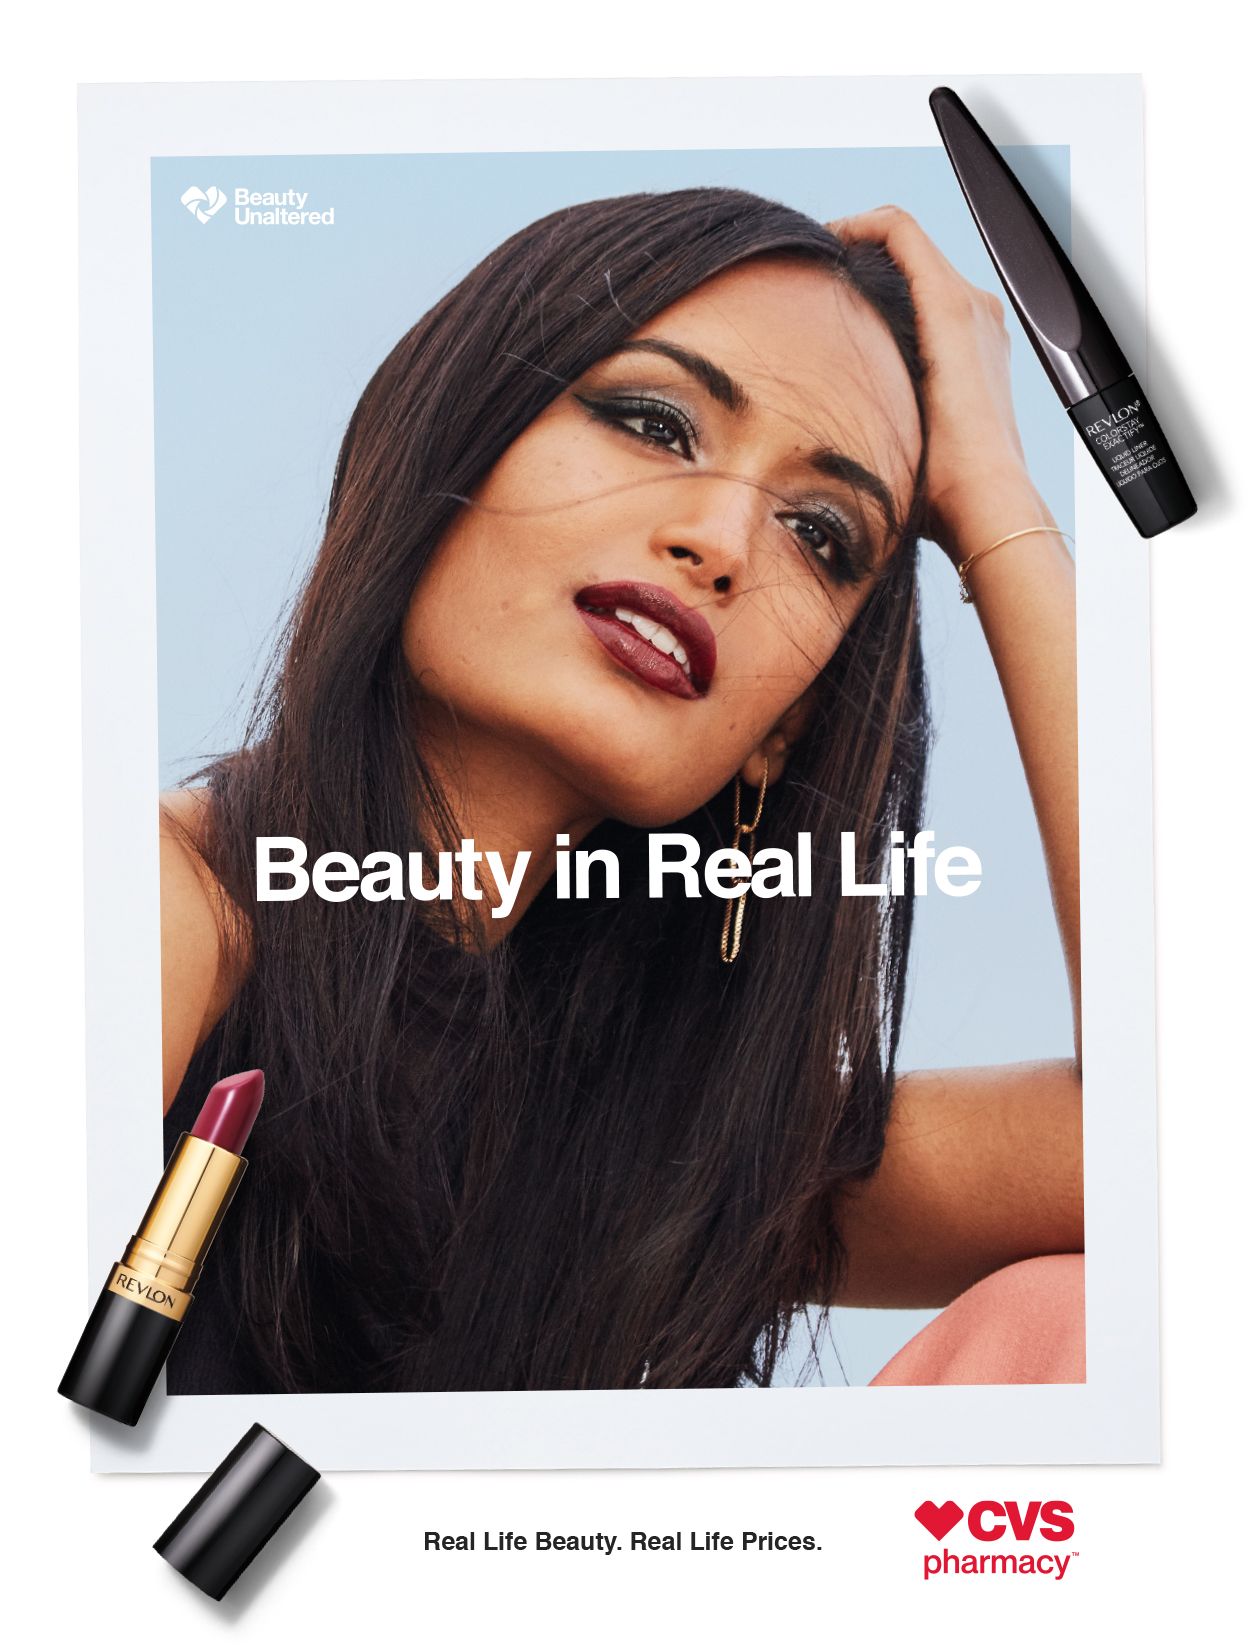 CVS launches 'Beauty in Real Life' campaign, unaltered pics